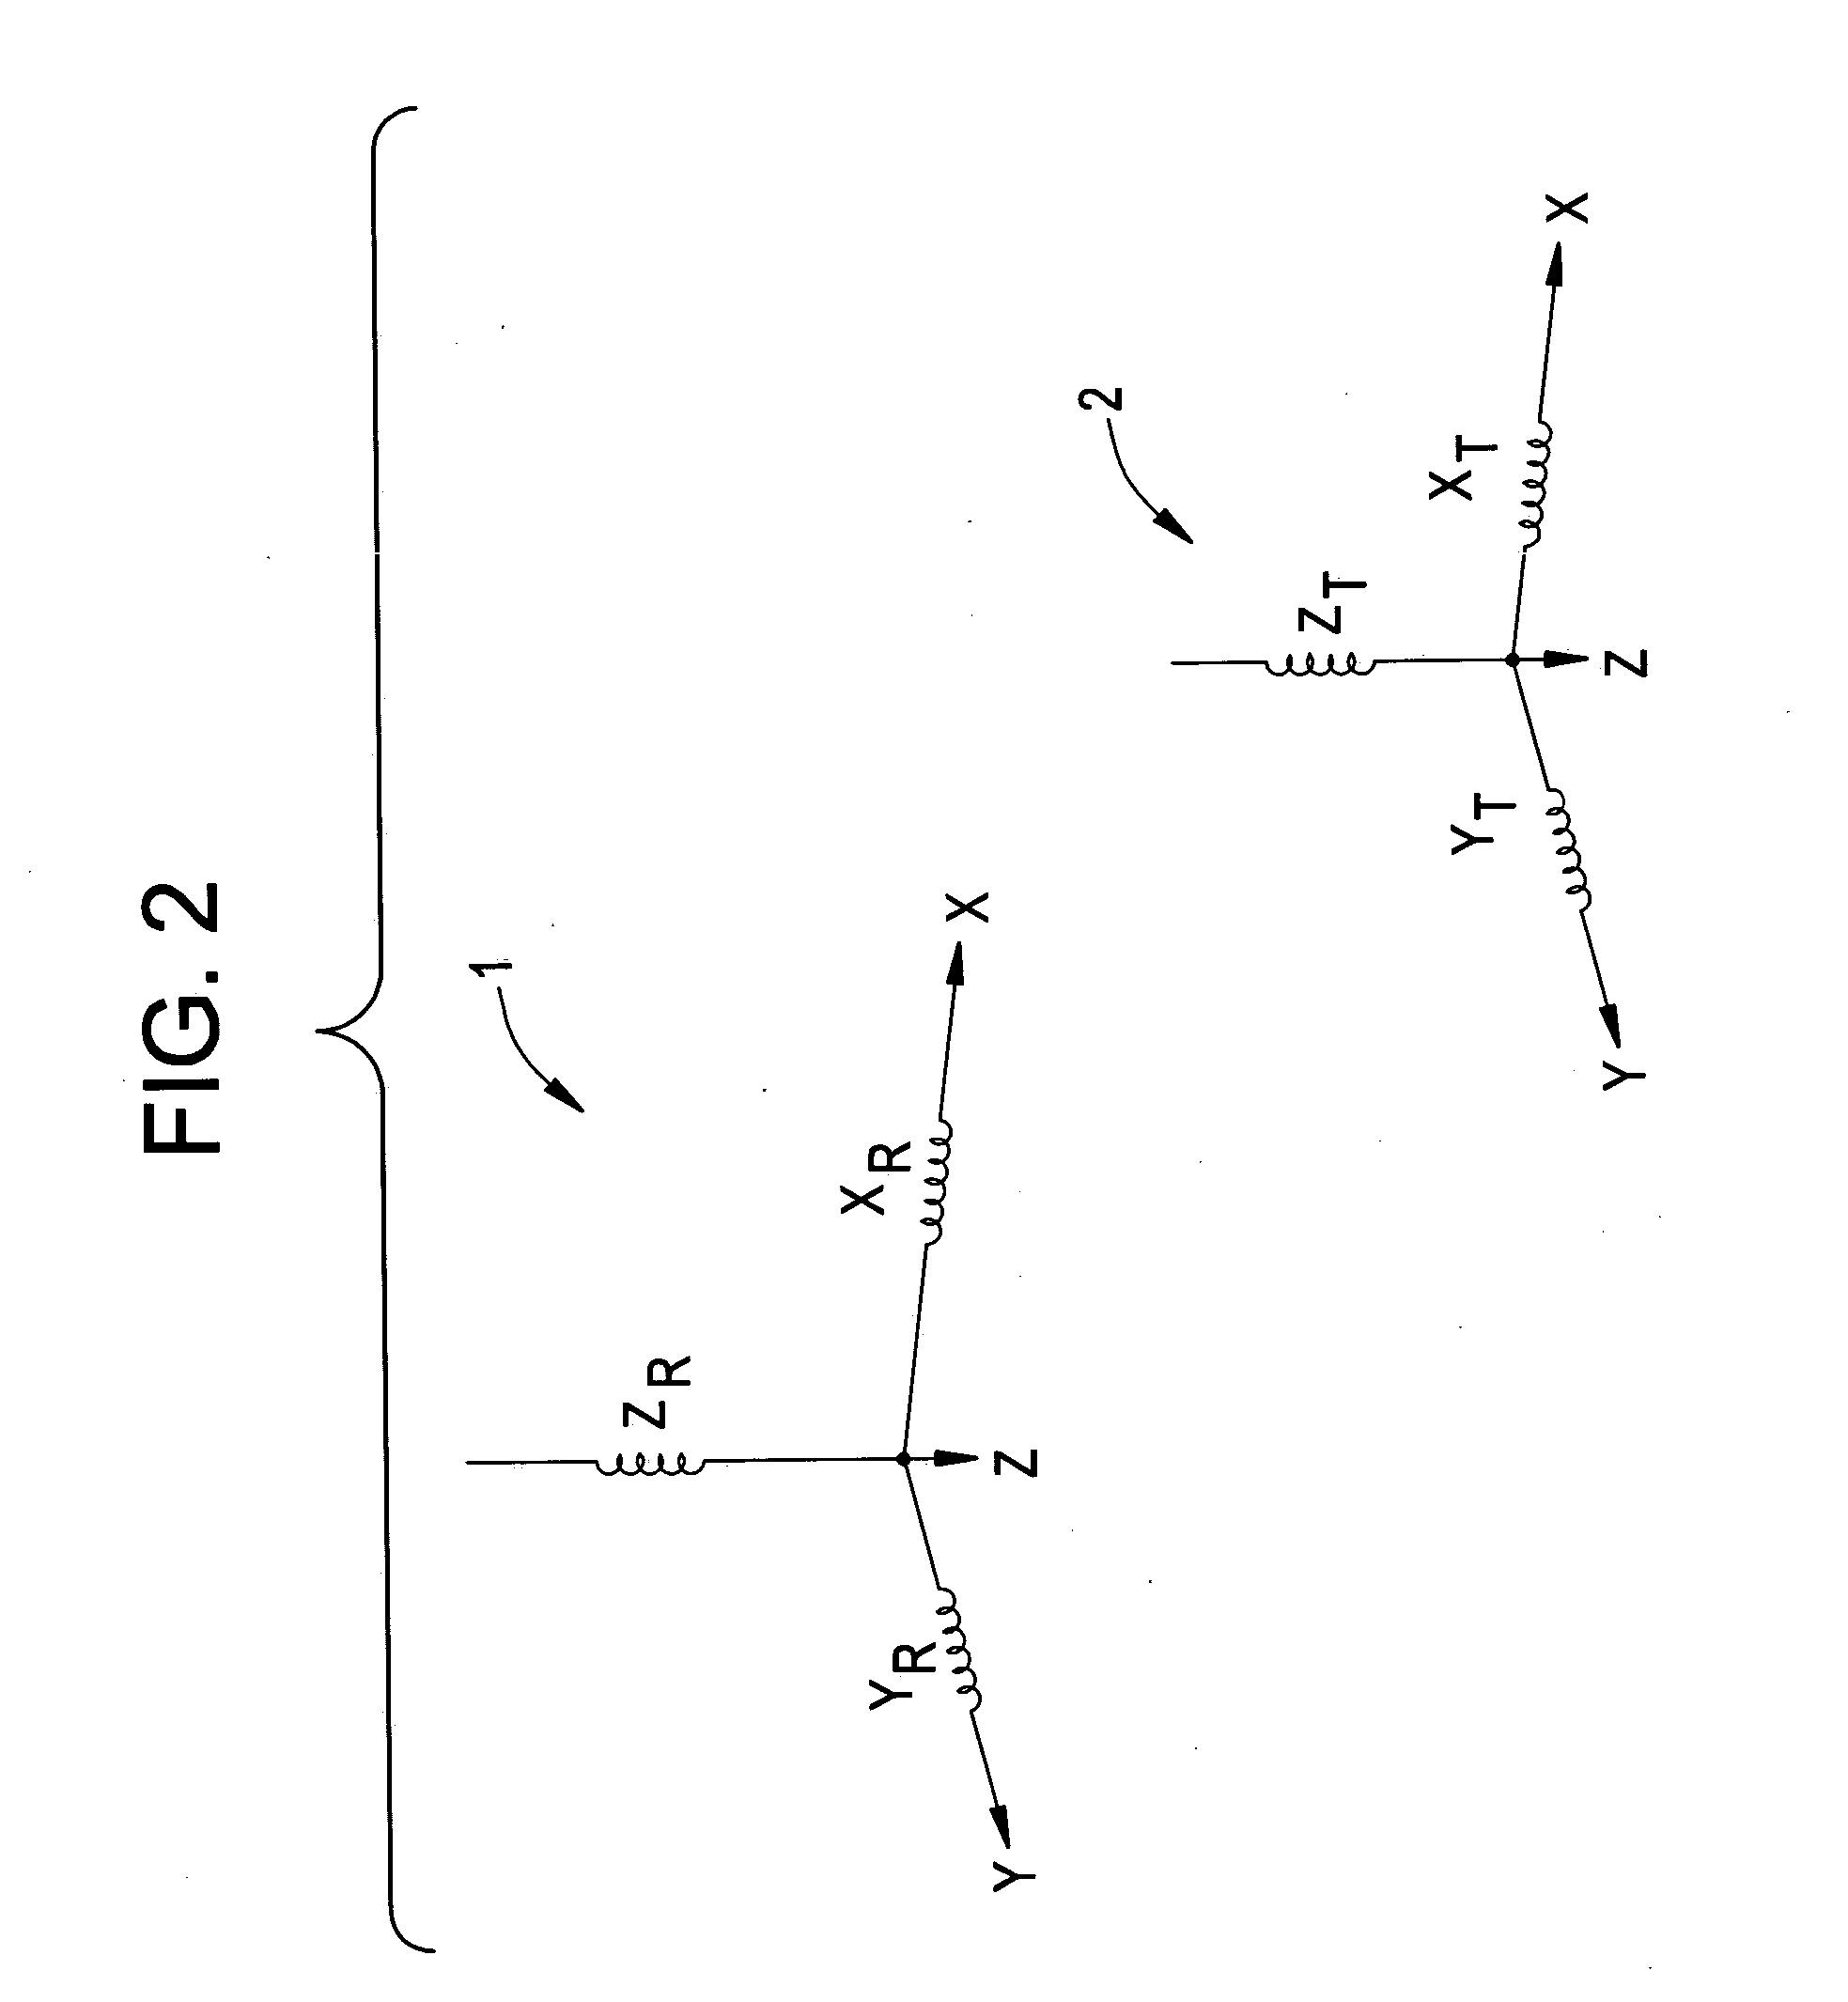 System and method for hemisphere disambiguation in electromagnetic tracking systems